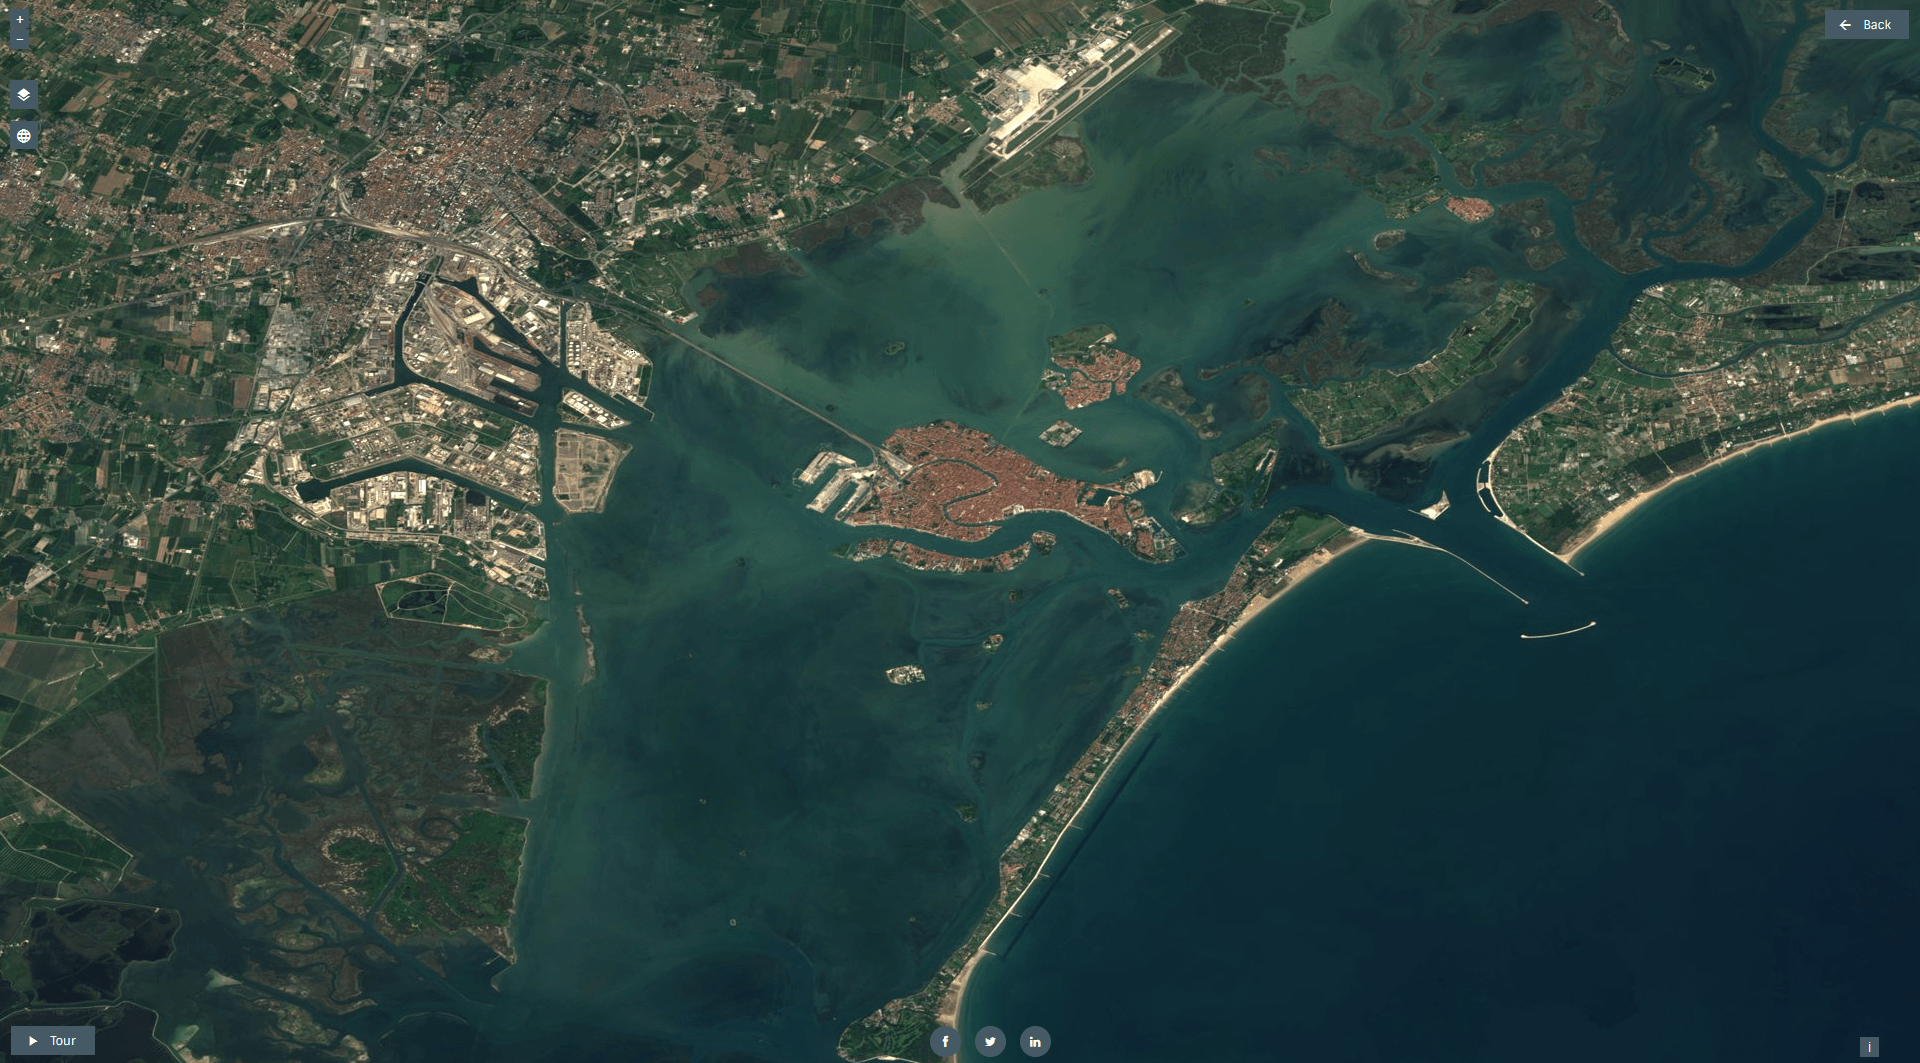 Venice from above captured by Sentinel-2